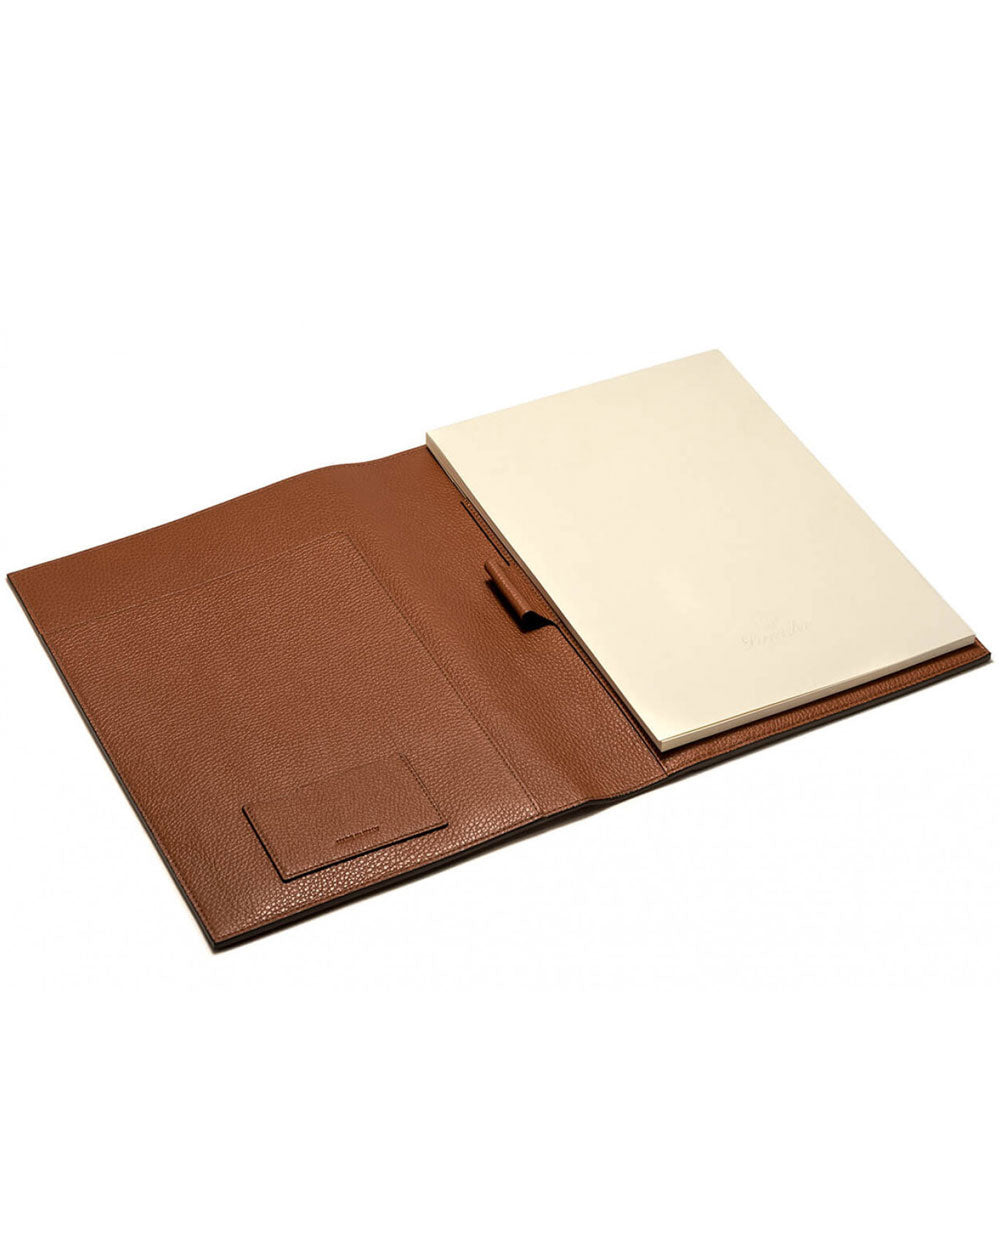 360 A4 Notepad Holder in Tan